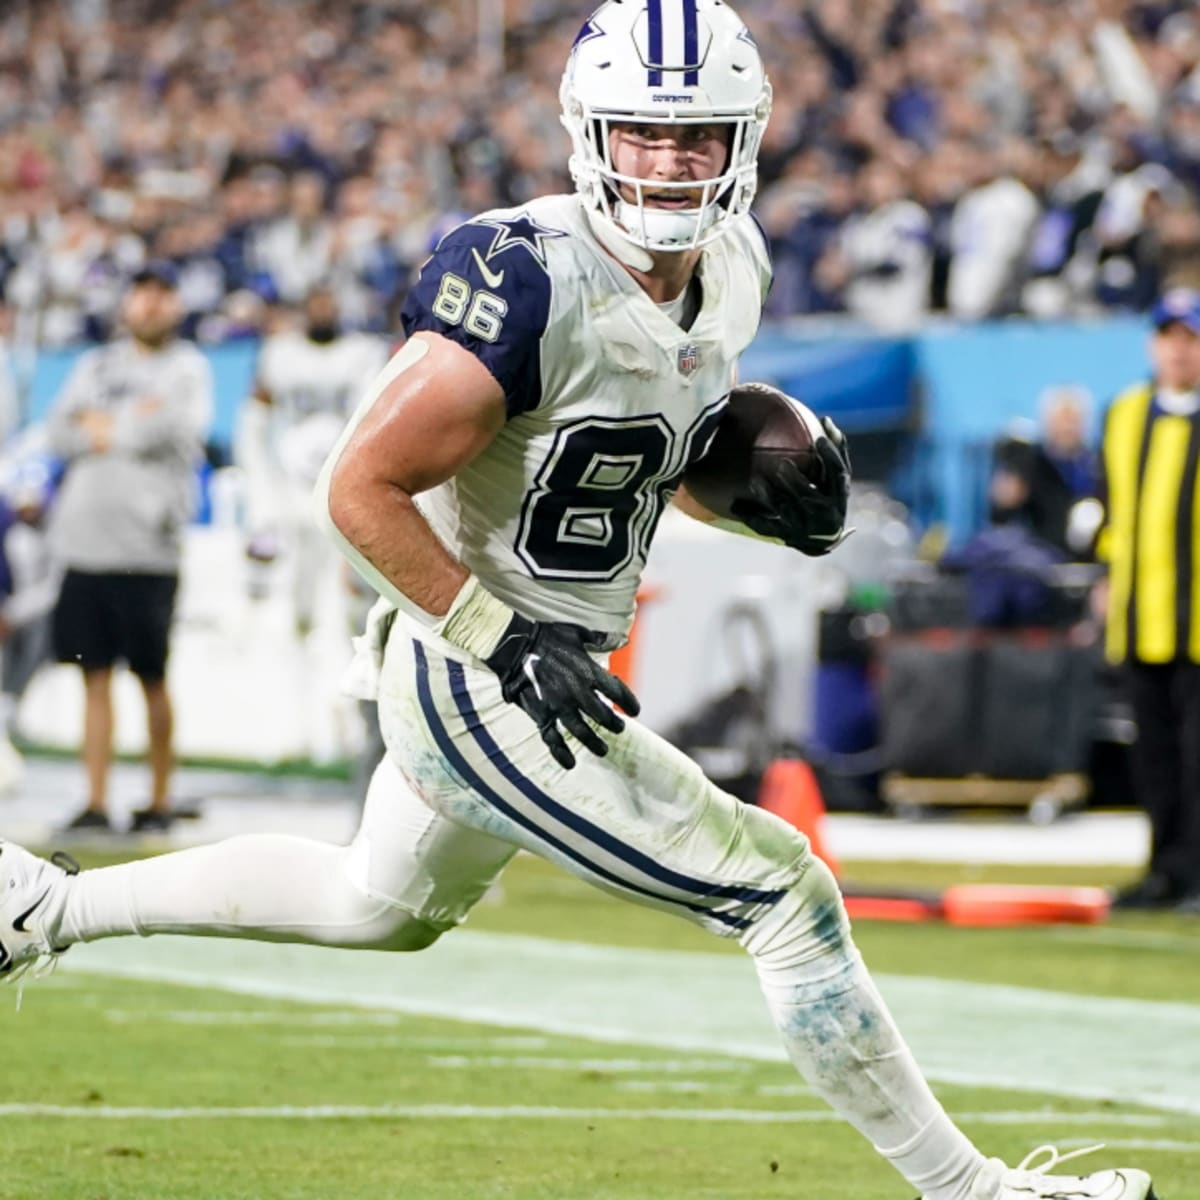 NFL - Texans to sign TE Dalton Schultz to a 1-year deal worth up